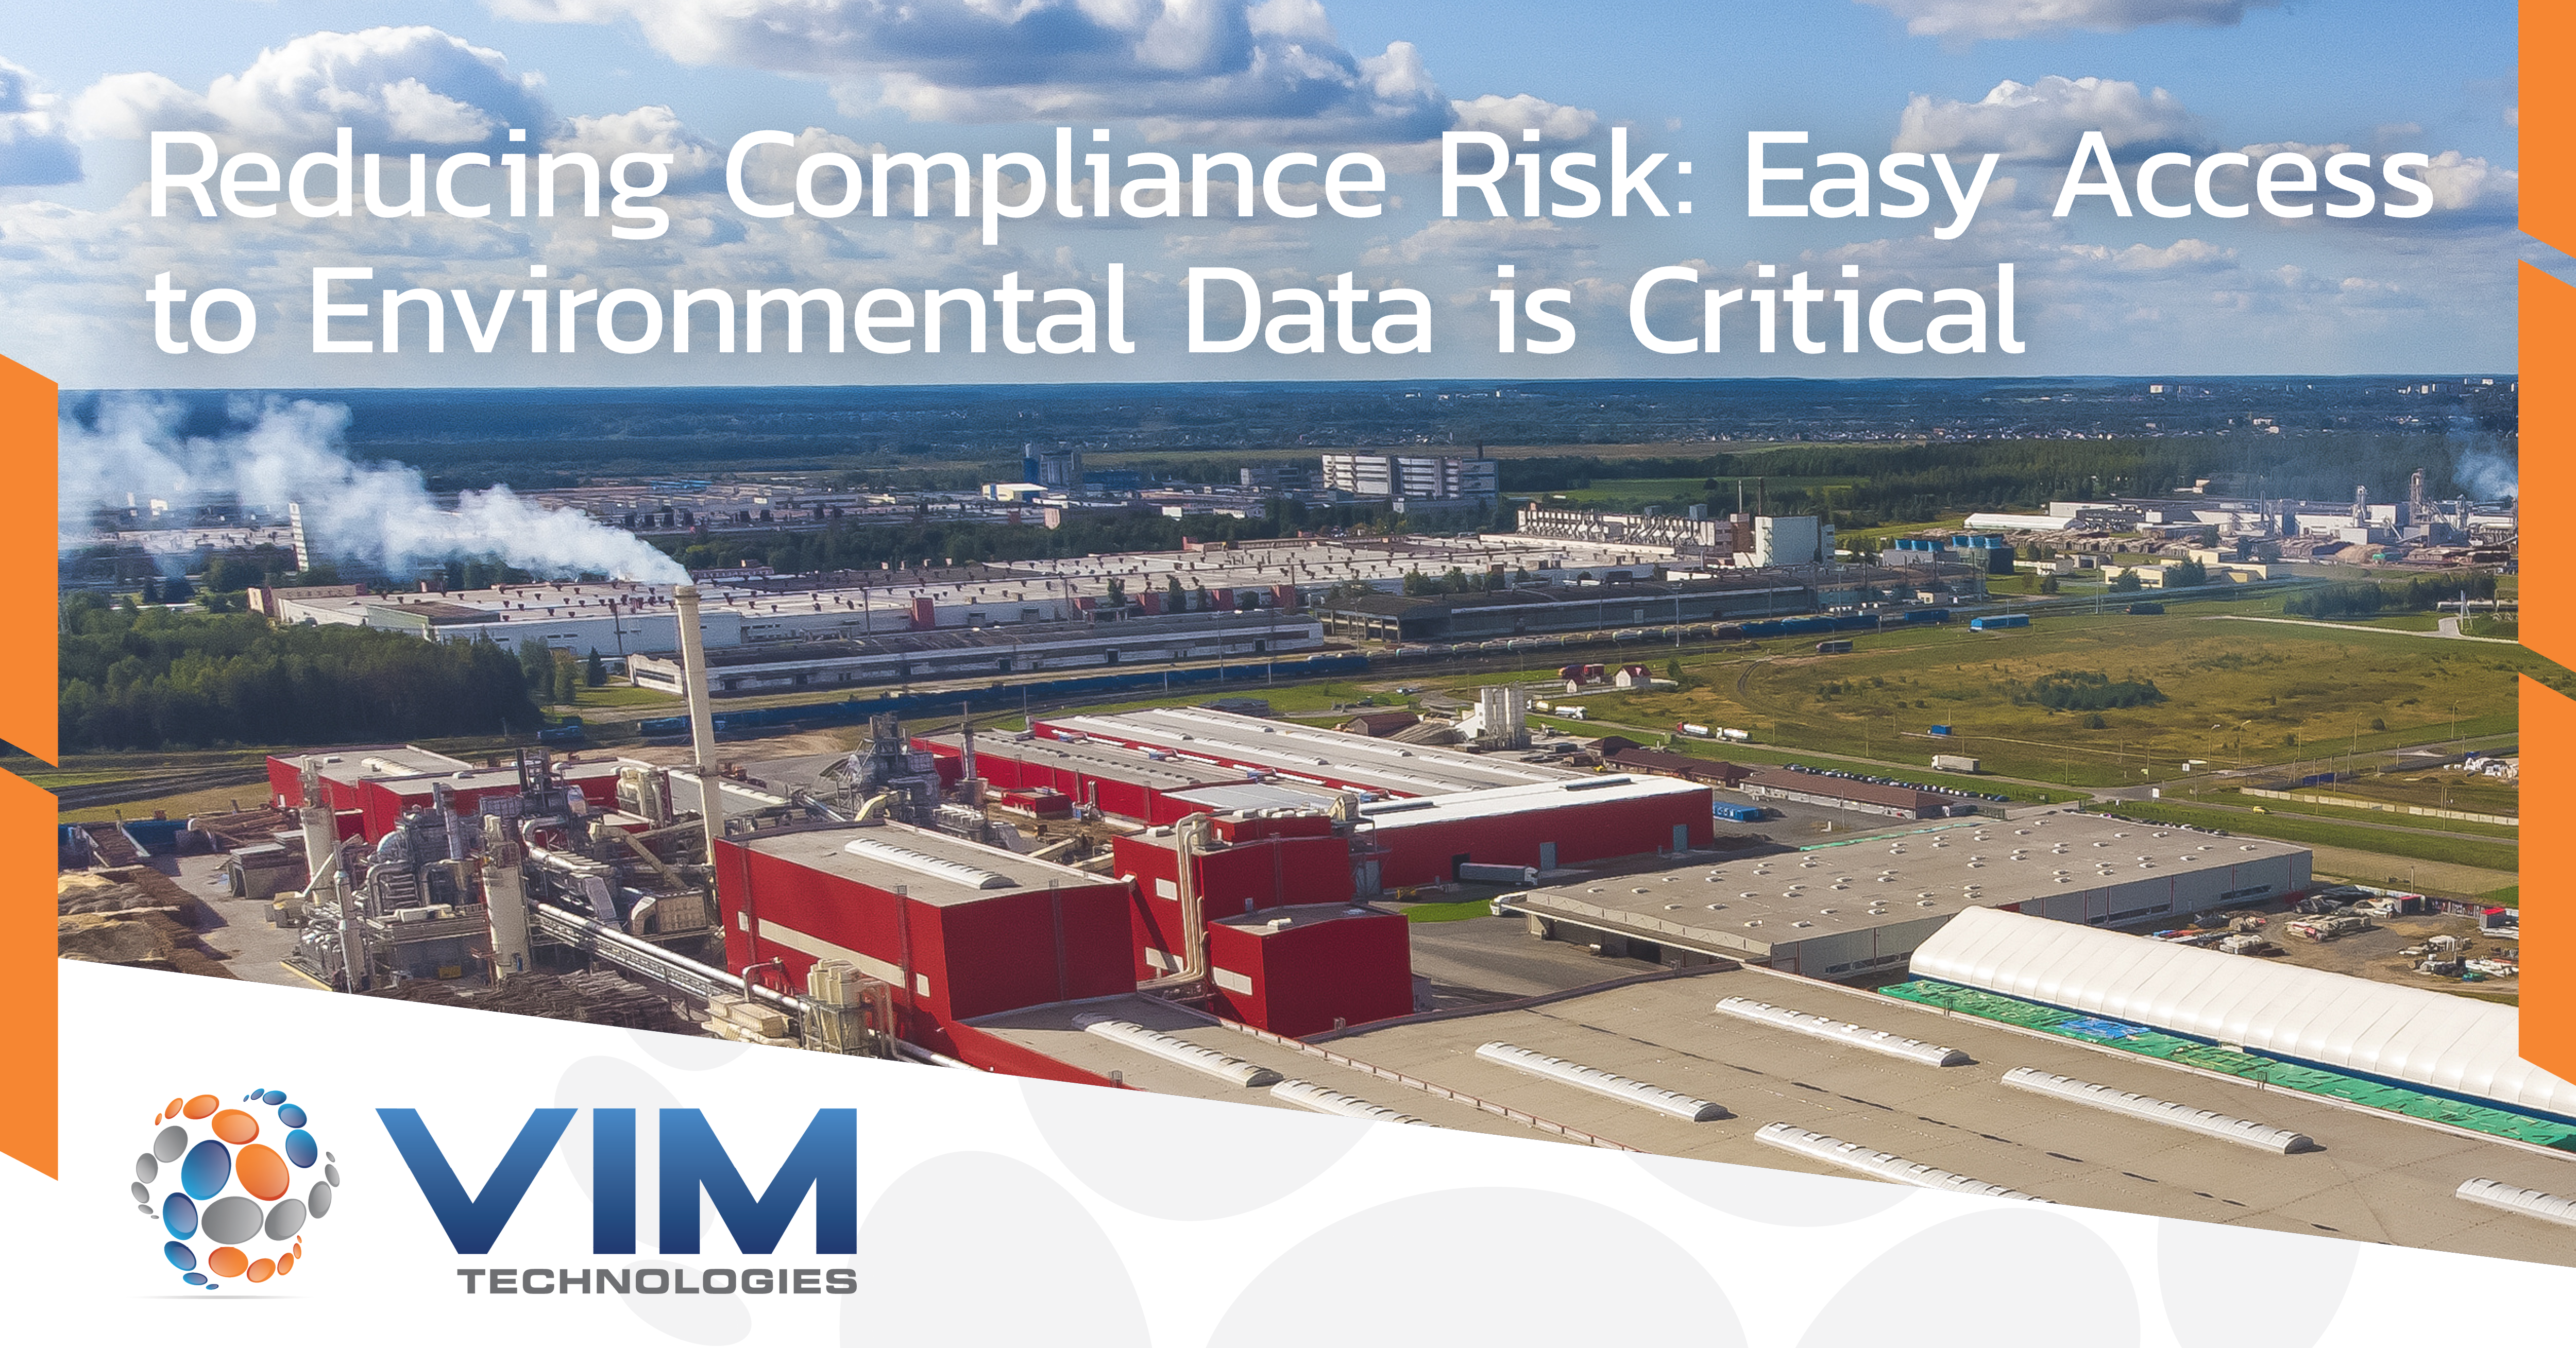 Reducing Compliance Risk: Easy Access to Environmental Data is Critical